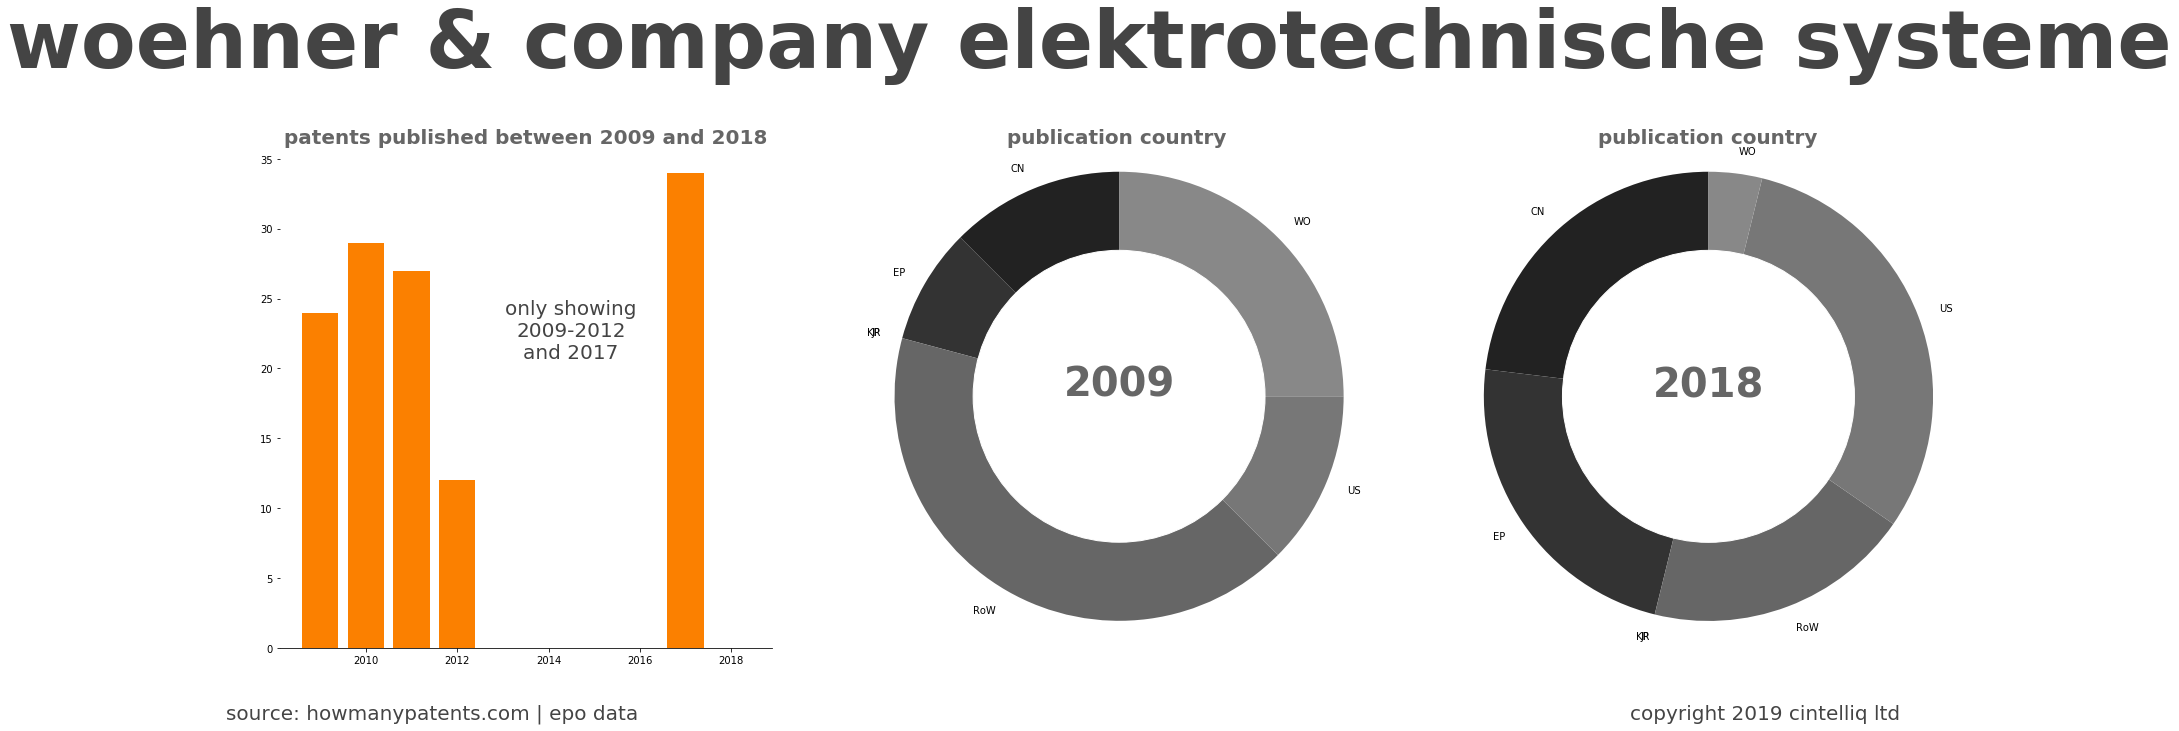 summary of patents for Woehner & Company Elektrotechnische Systeme